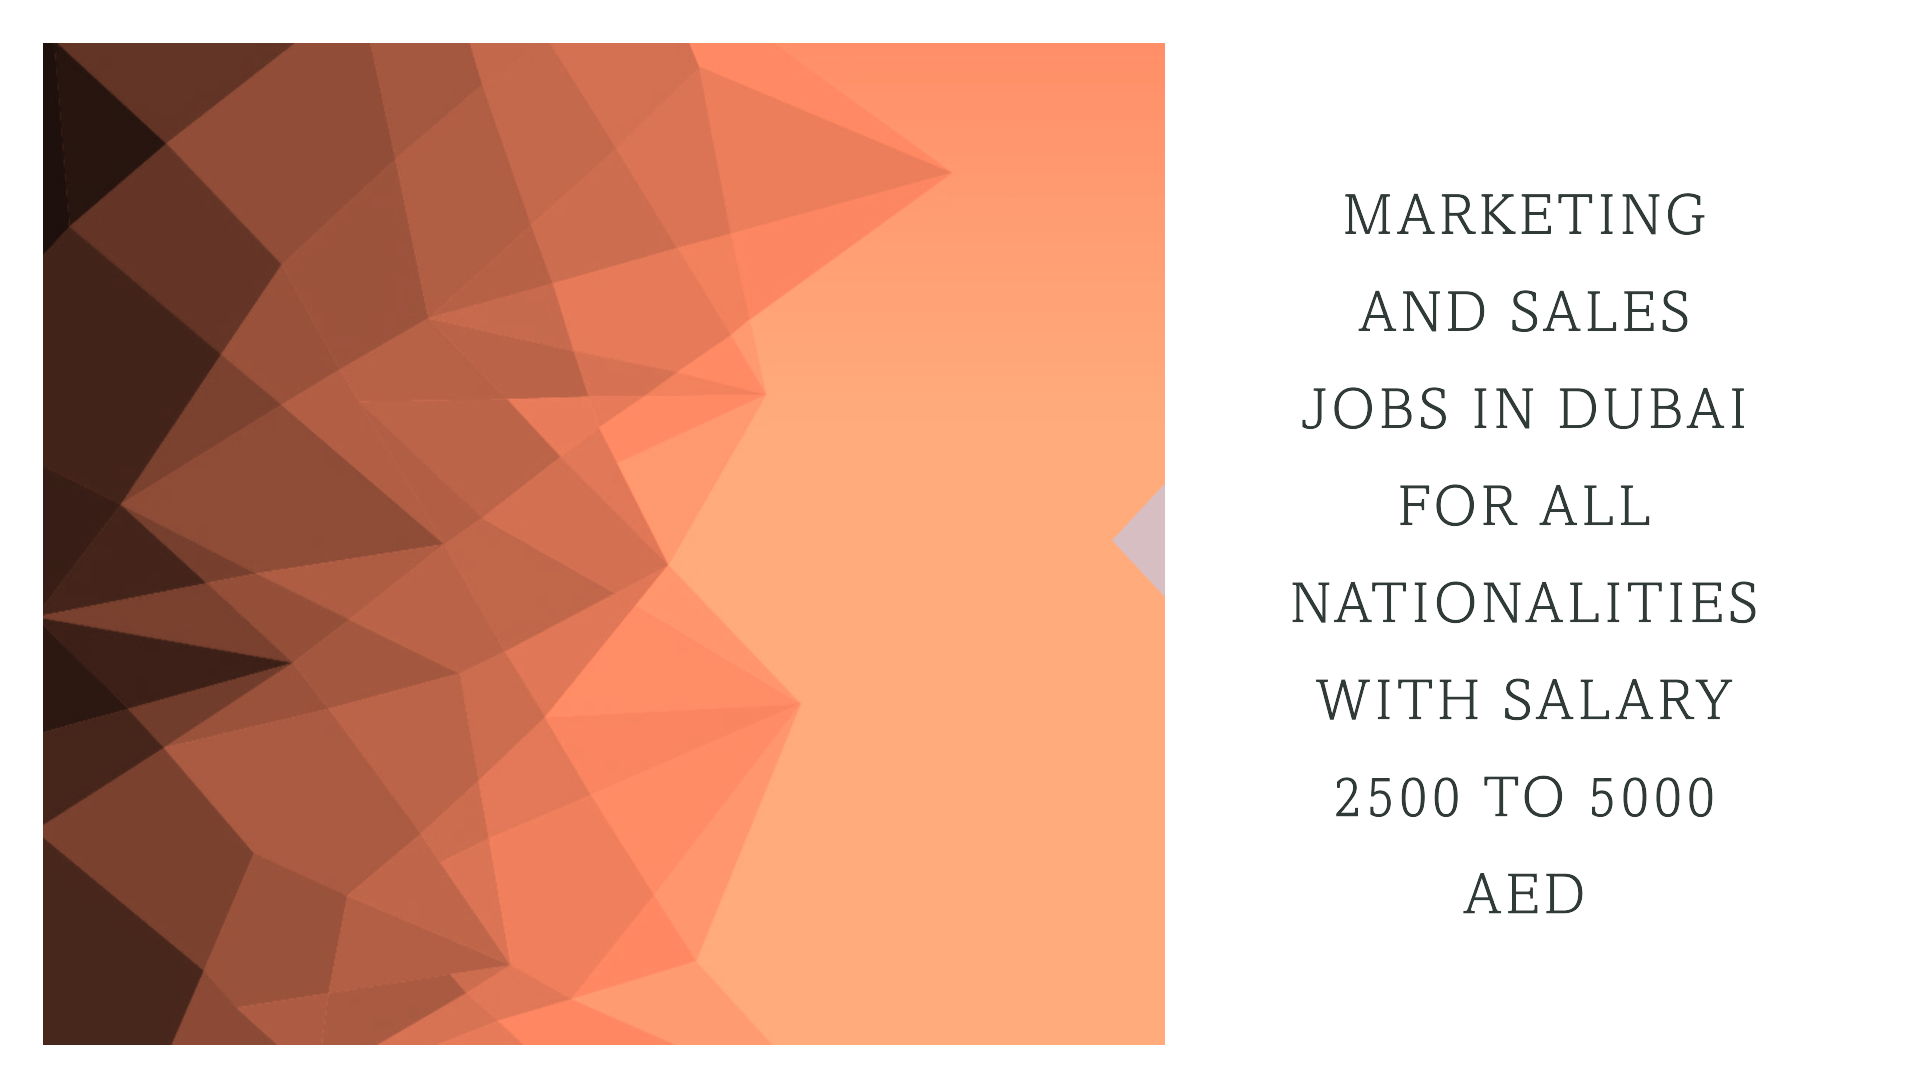 marketing and sales jobs in dubai for all nationalities with salary 2500 to 5000 AED